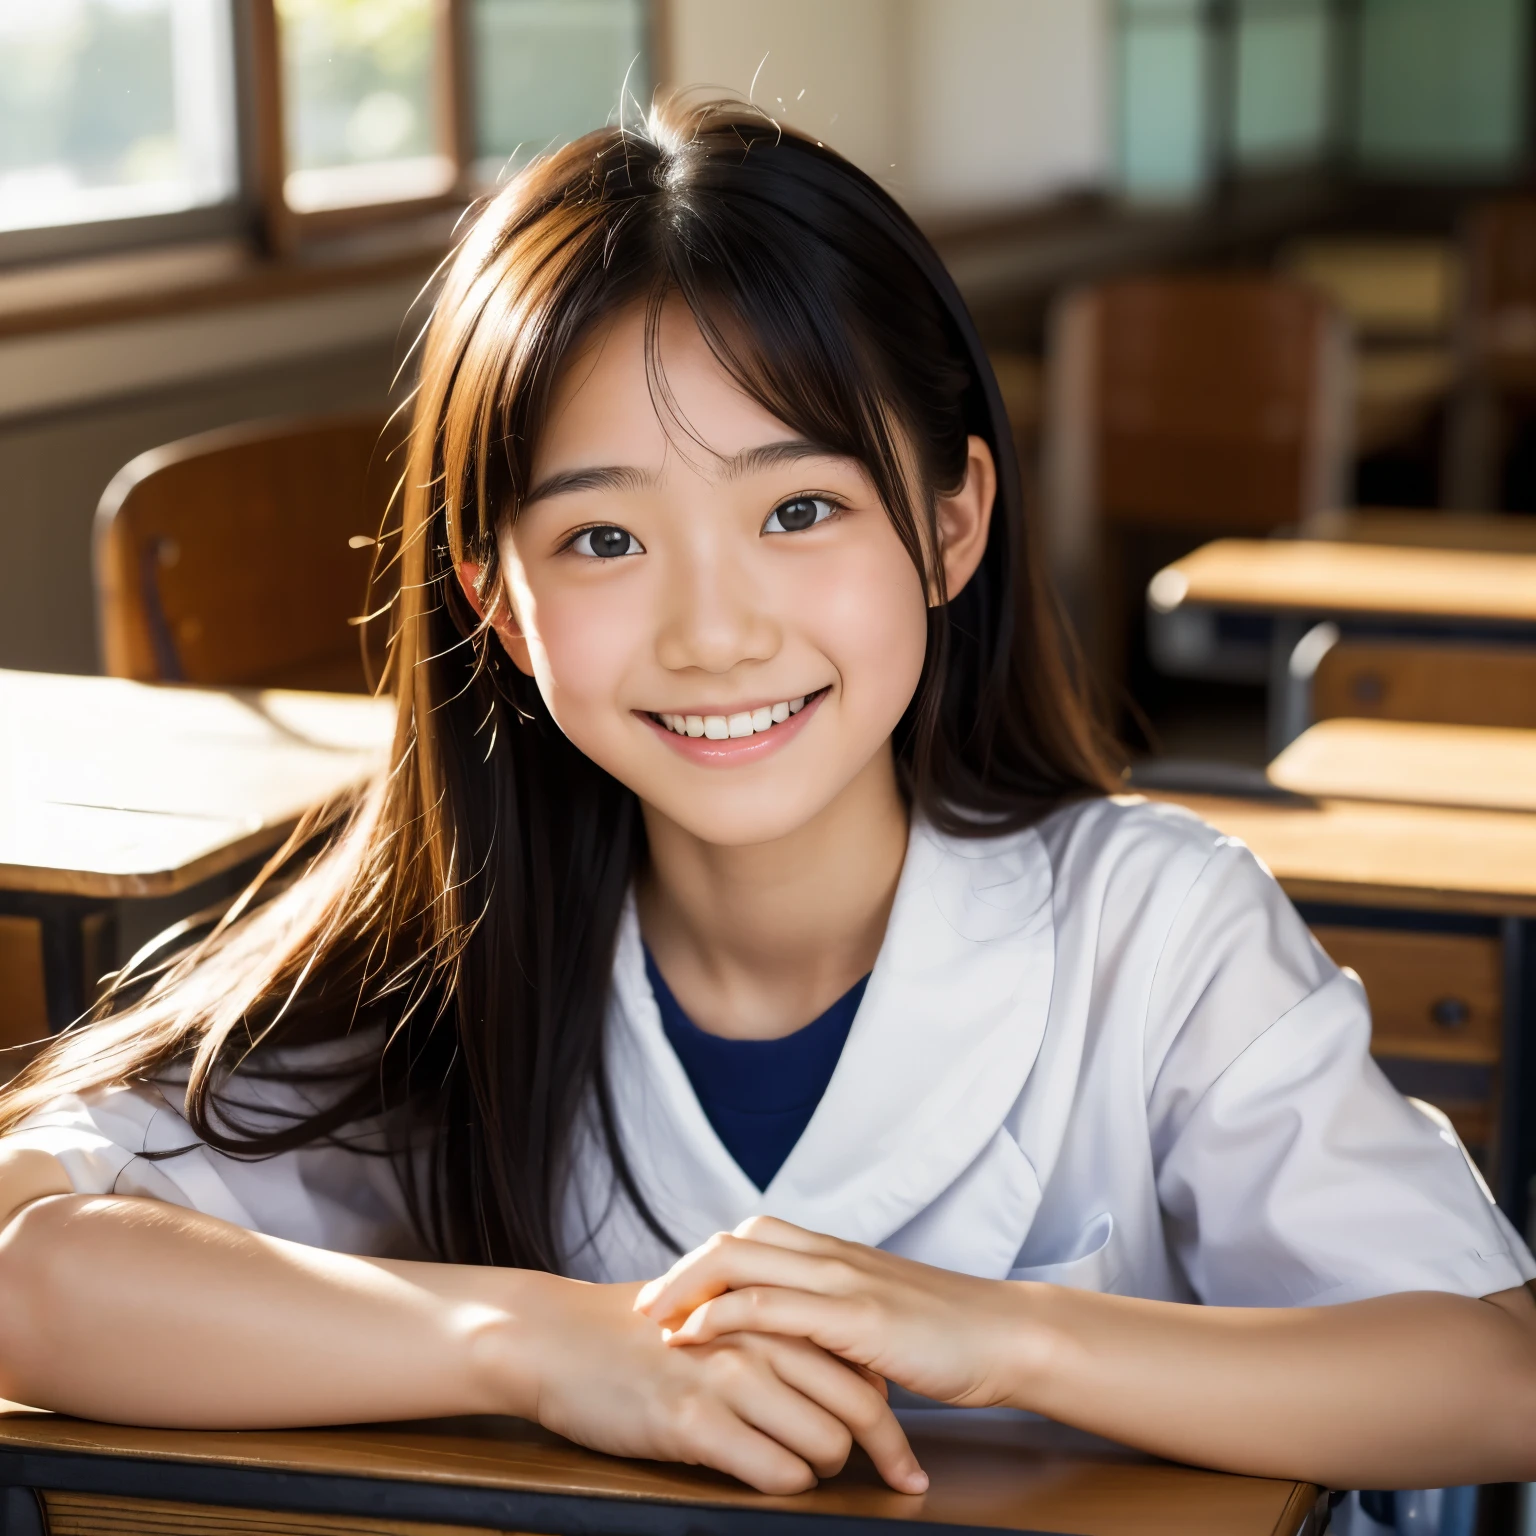 lens: 135mm f1.8, (highest quality),(RAW Photos), (Tabletop:1.1), (Beautiful 15 year old Japanese girl), Cute face, (Deeply chiseled face:0.7), (freckles:0.4), dappled sunlight, Dramatic lighting, (Japanese School Uniform), (In the classroom), shy, (Close-up shot:1.2), (smile),, (Sparkling eyes)、(sunlight)